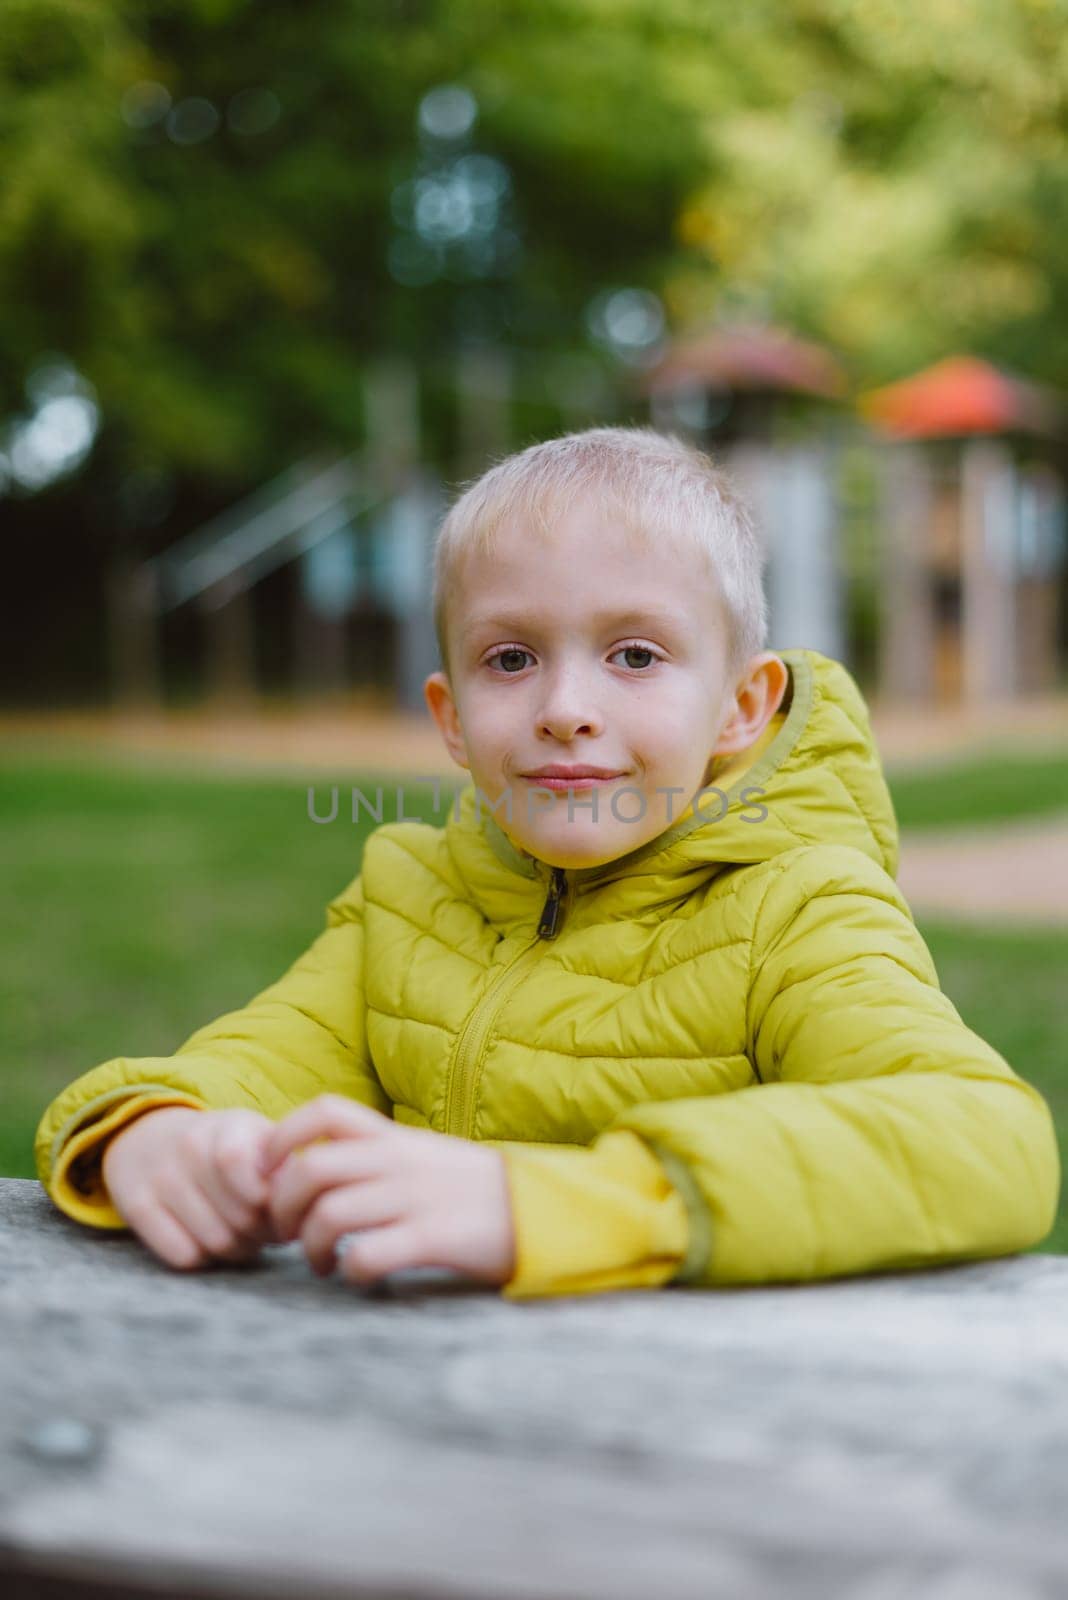 A boy sits at a table in the park in the fall season. Child Boy Son In Autumn Park, Sitting On Wooden Bench And Table. Little Kid Outdoors